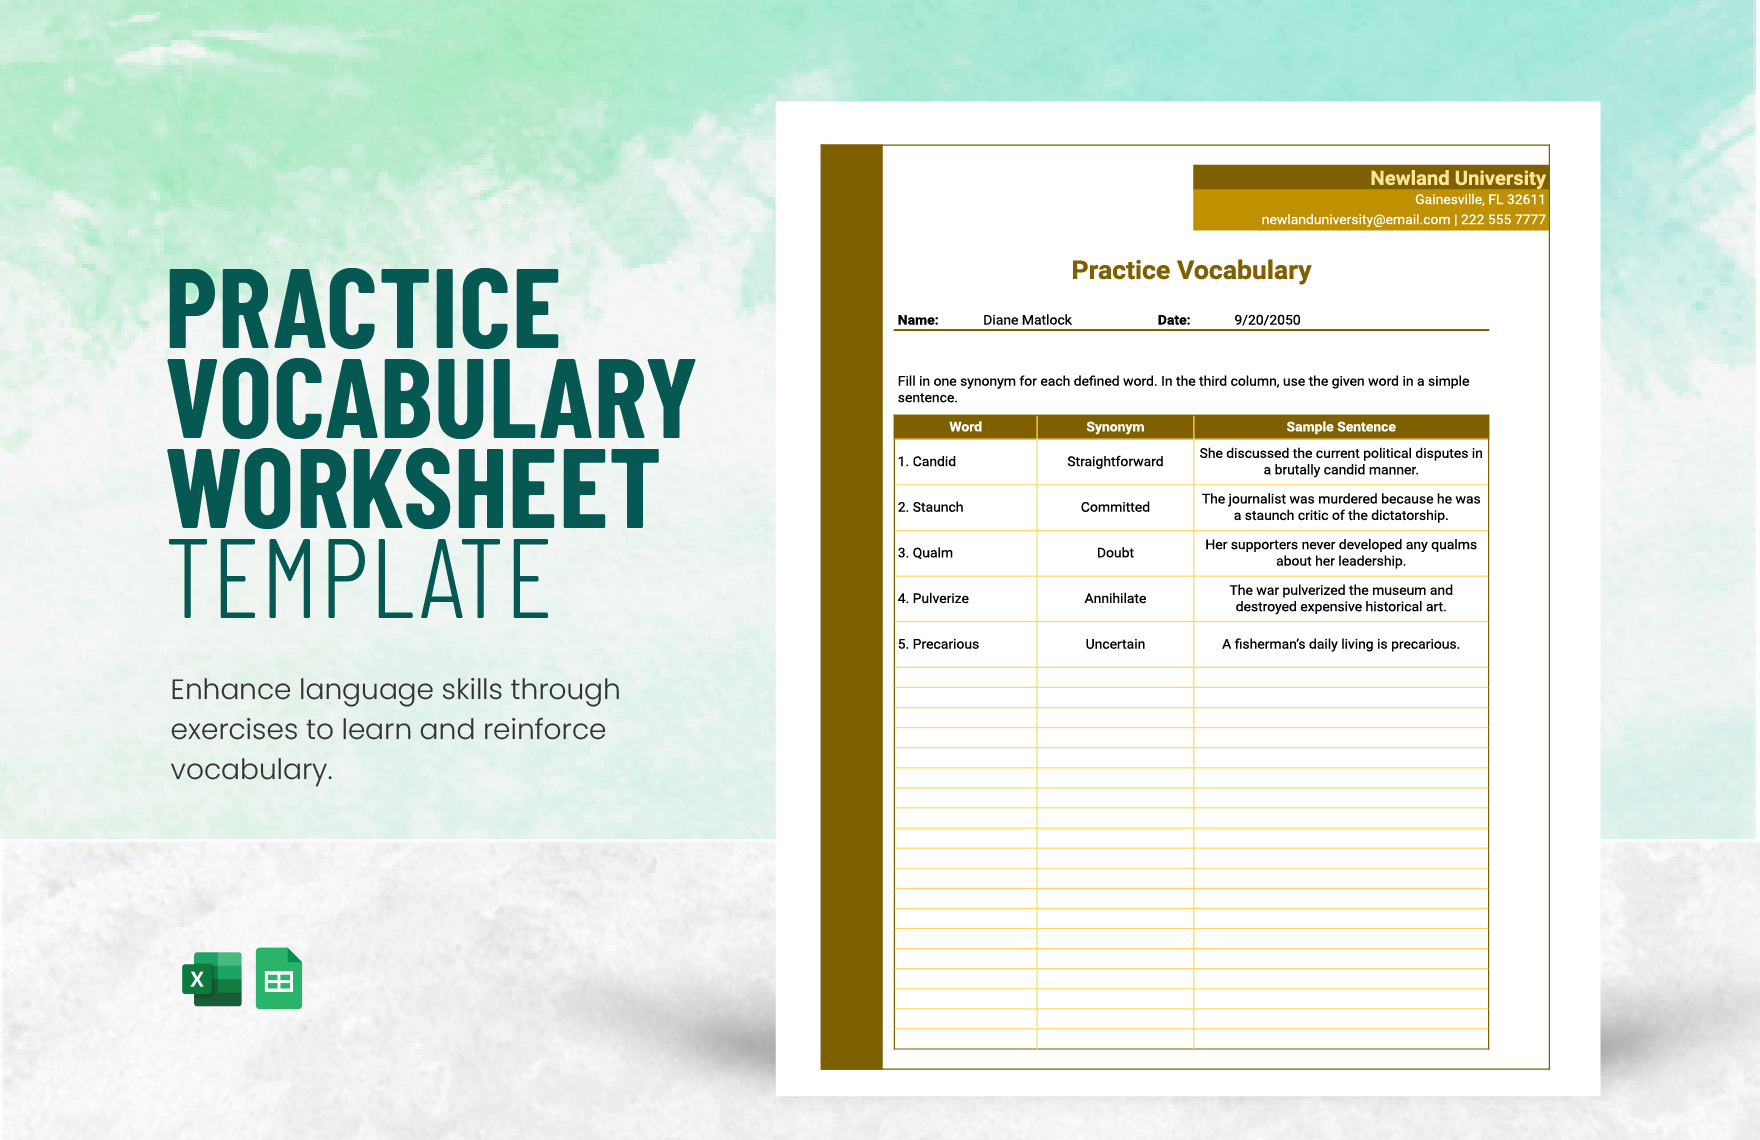 Practice Vocabulary Worksheet Template in Excel, Google Sheets